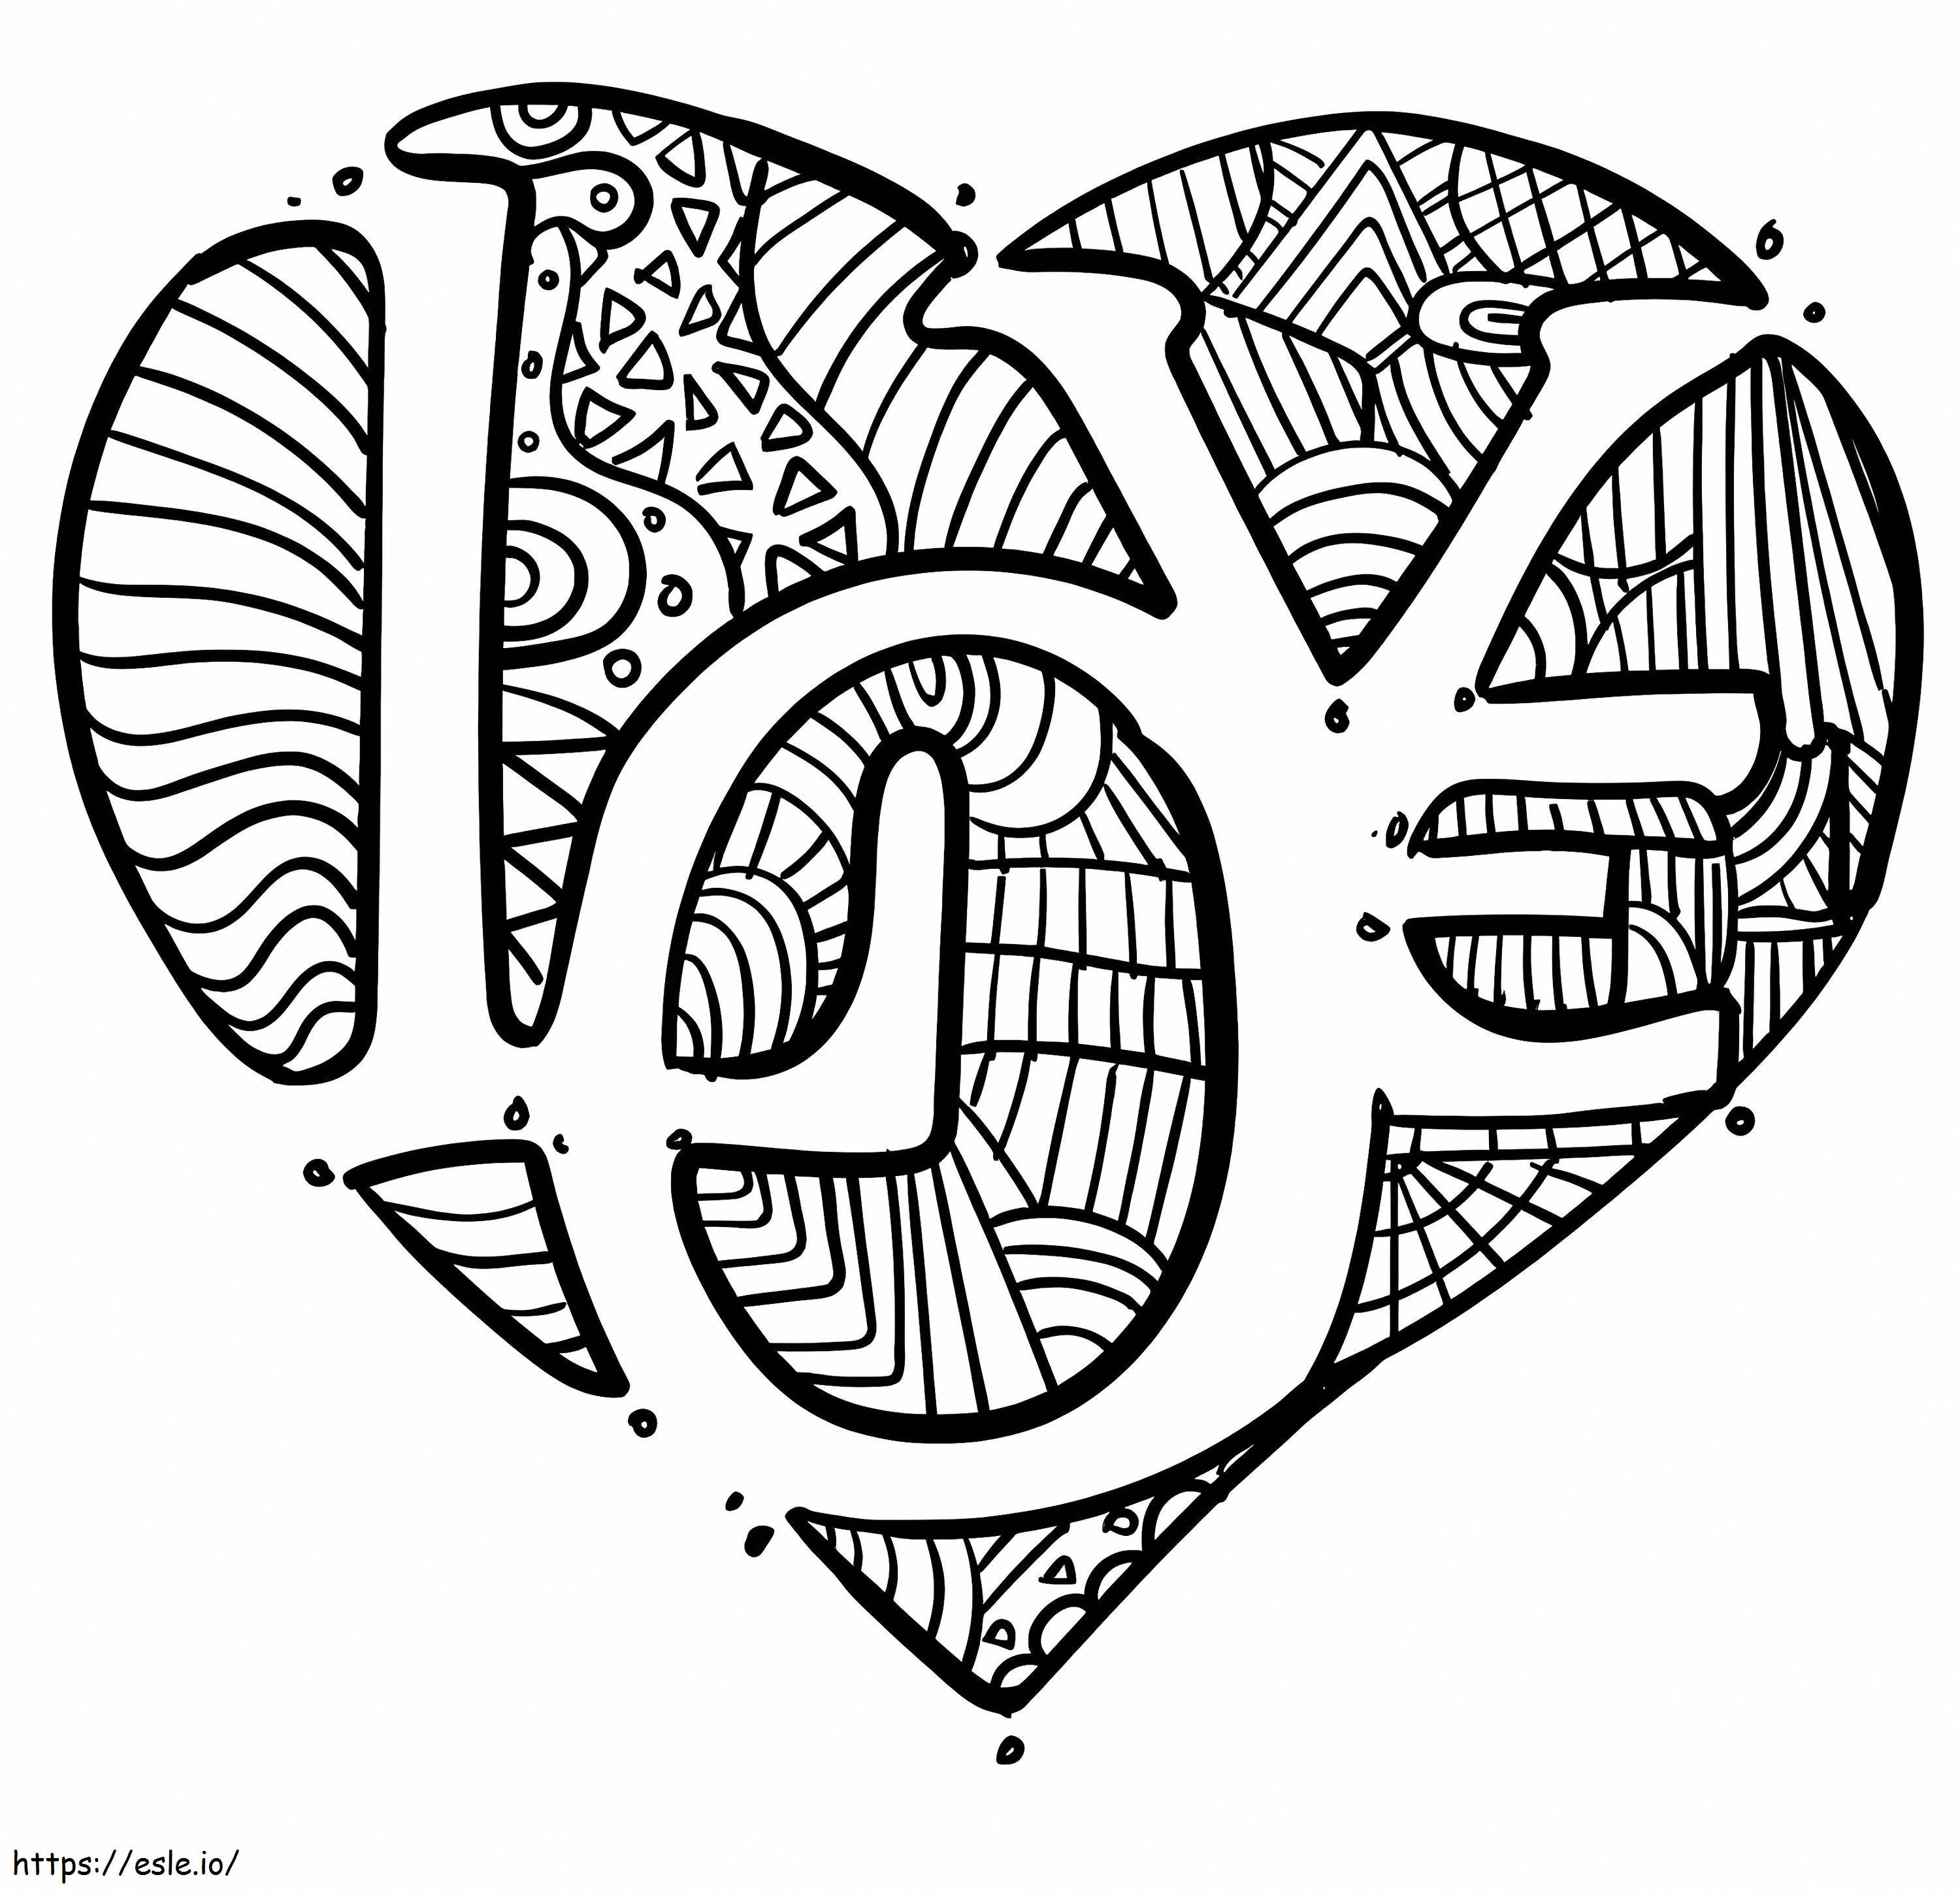 Love In Heart coloring page